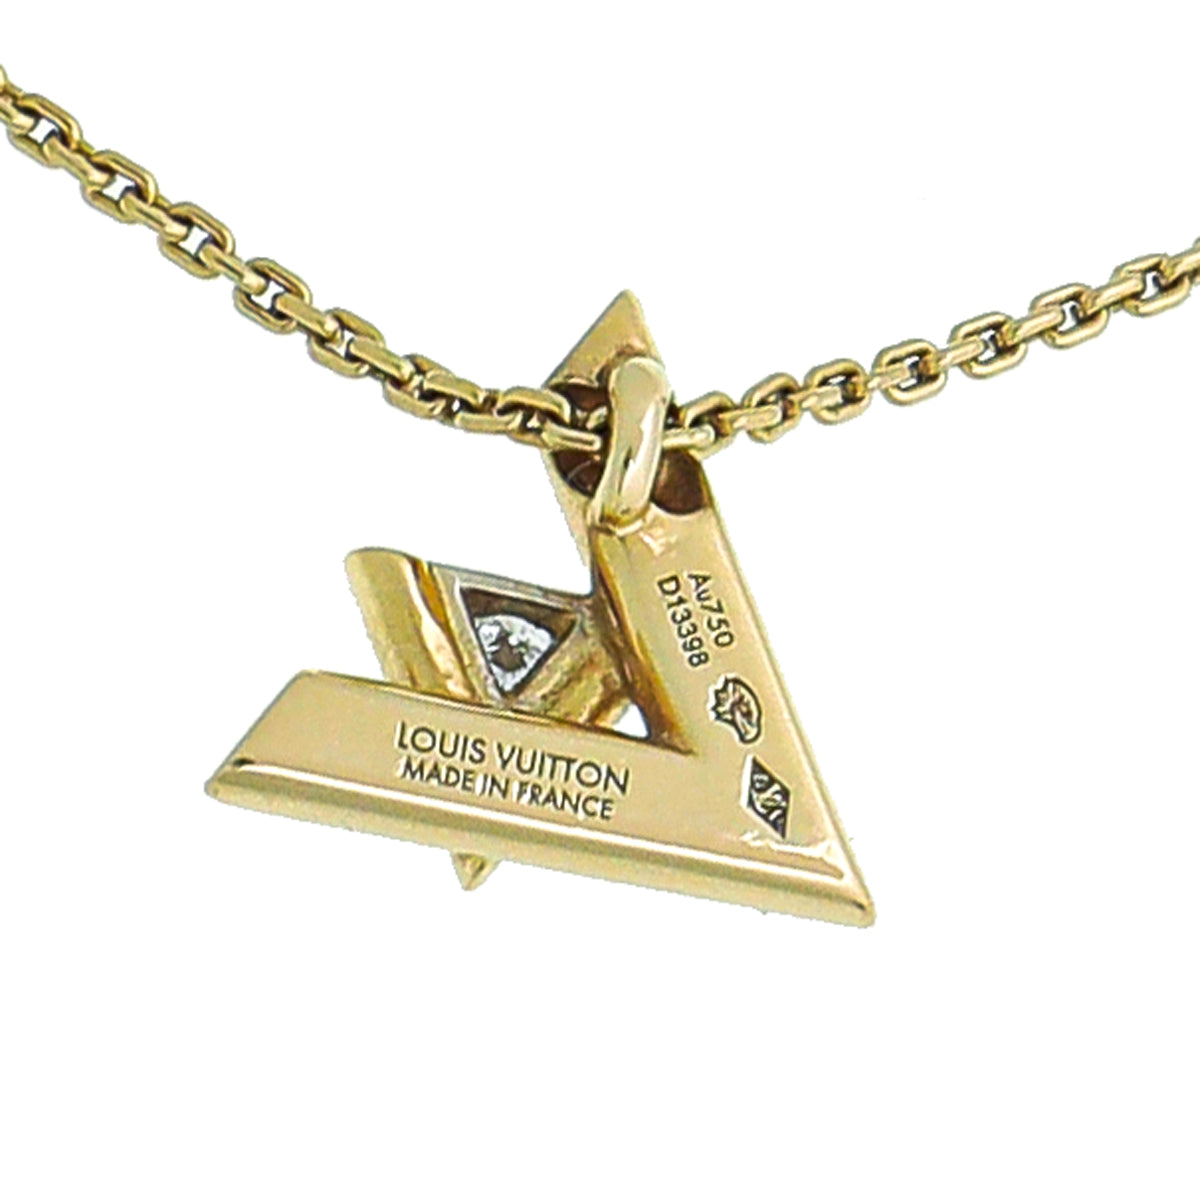 Louis Vuitton Pre-owned Women's Yellow Gold Necklace - Gold - One Size